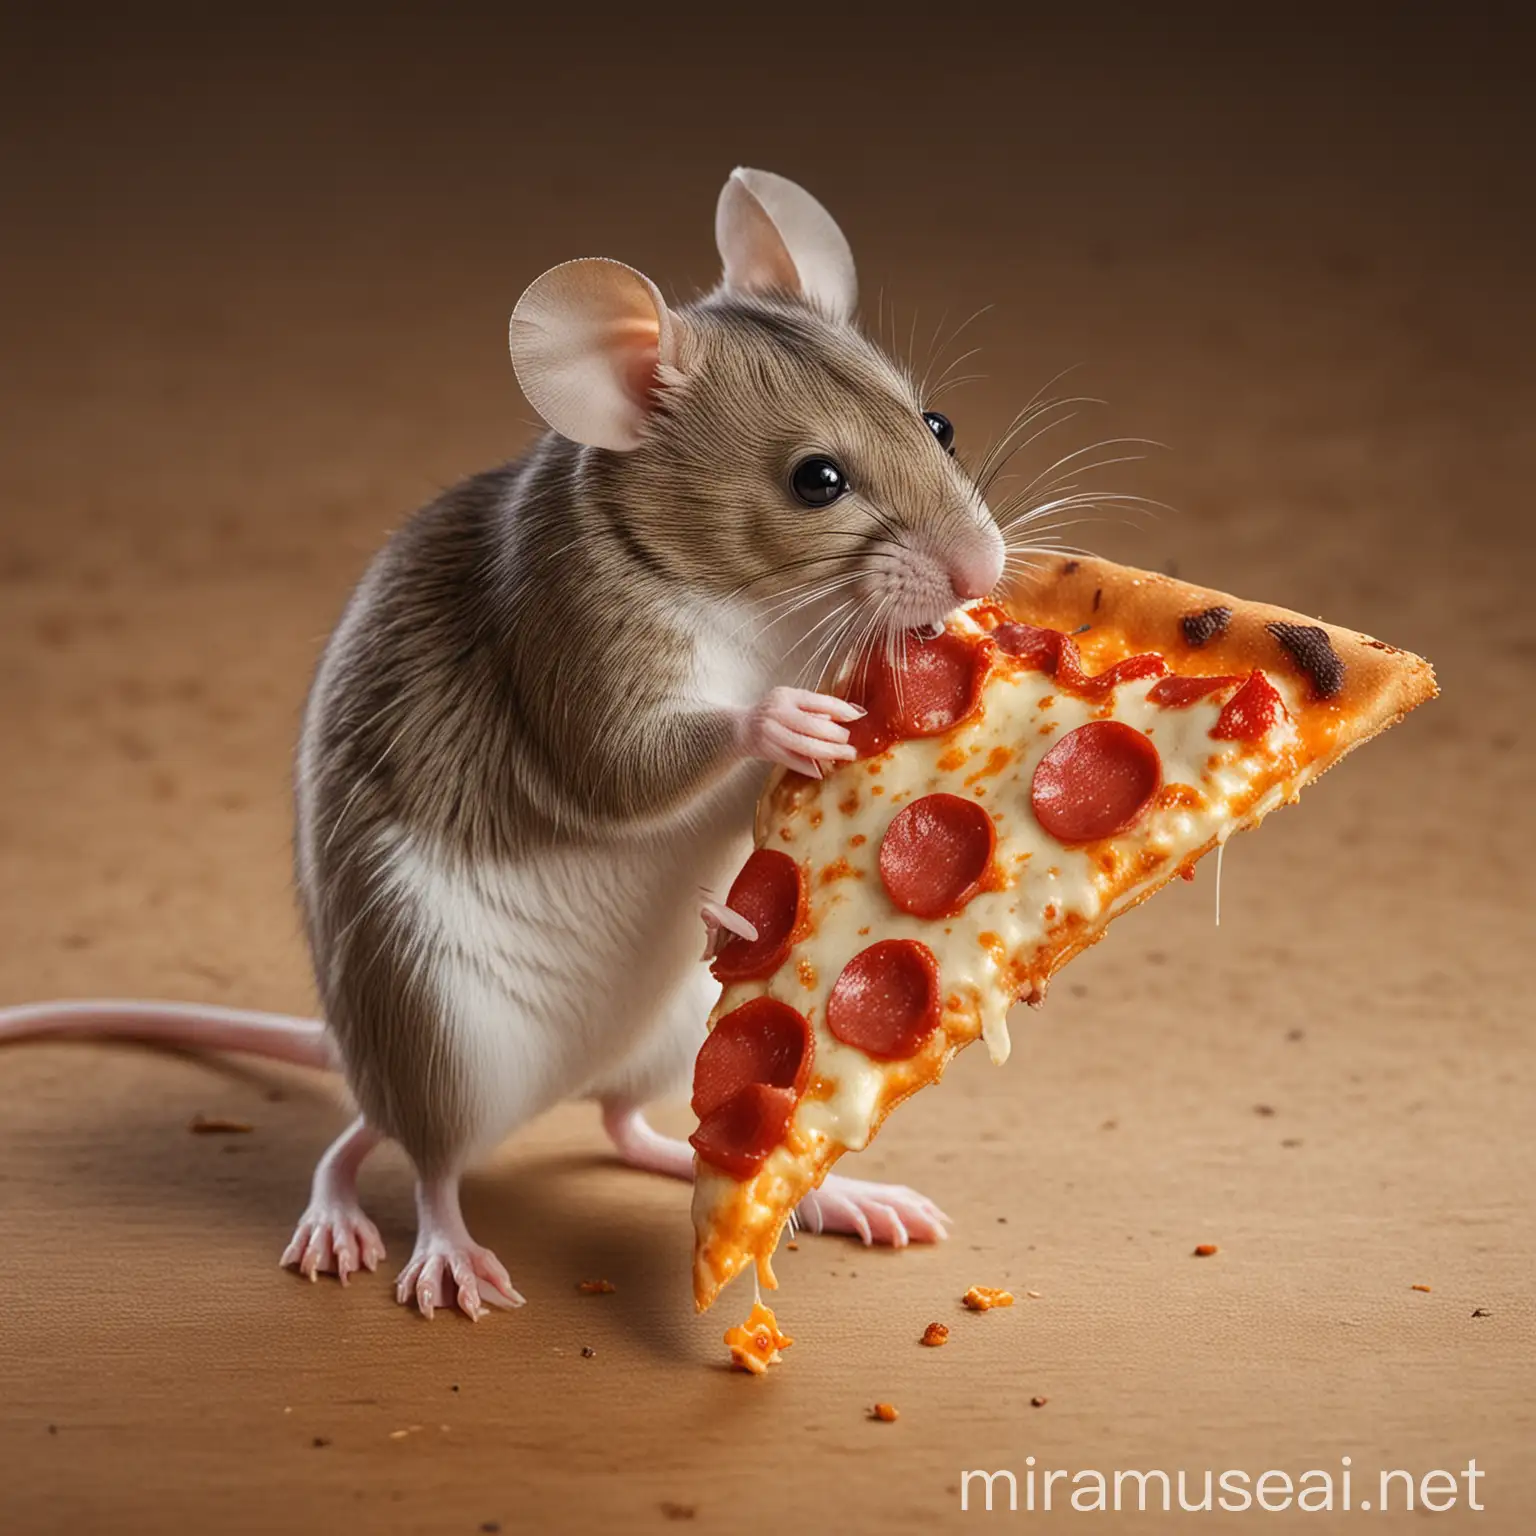 mouse eating a pizza slice